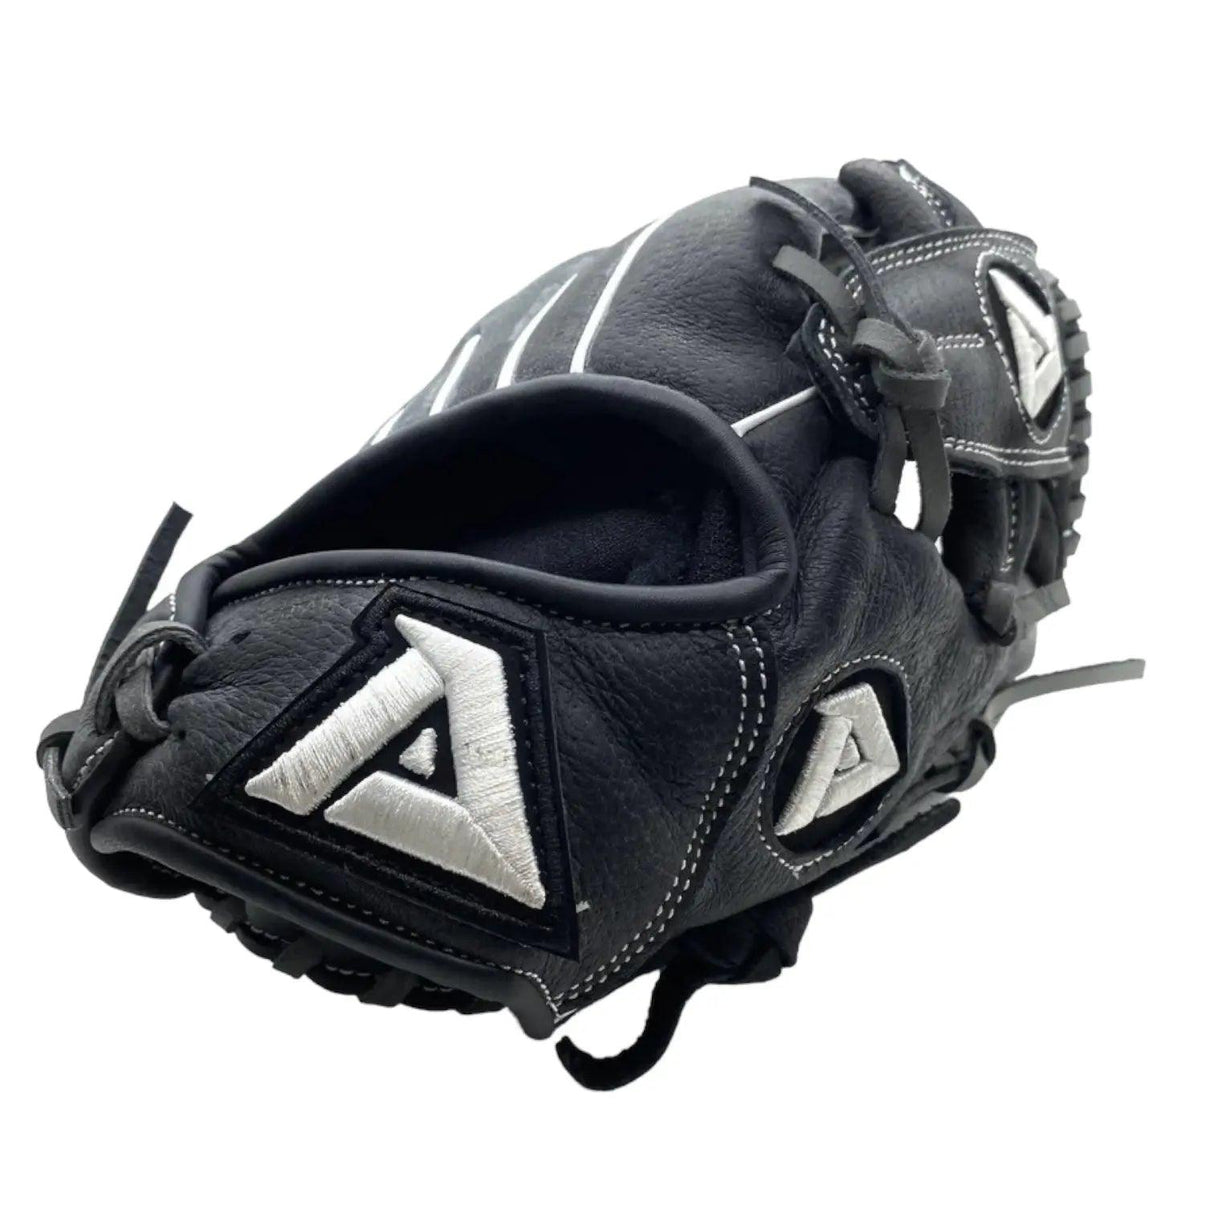 Akadema Youth Glove 10.5” In Ages 6-8 - CustomBallgloves.com